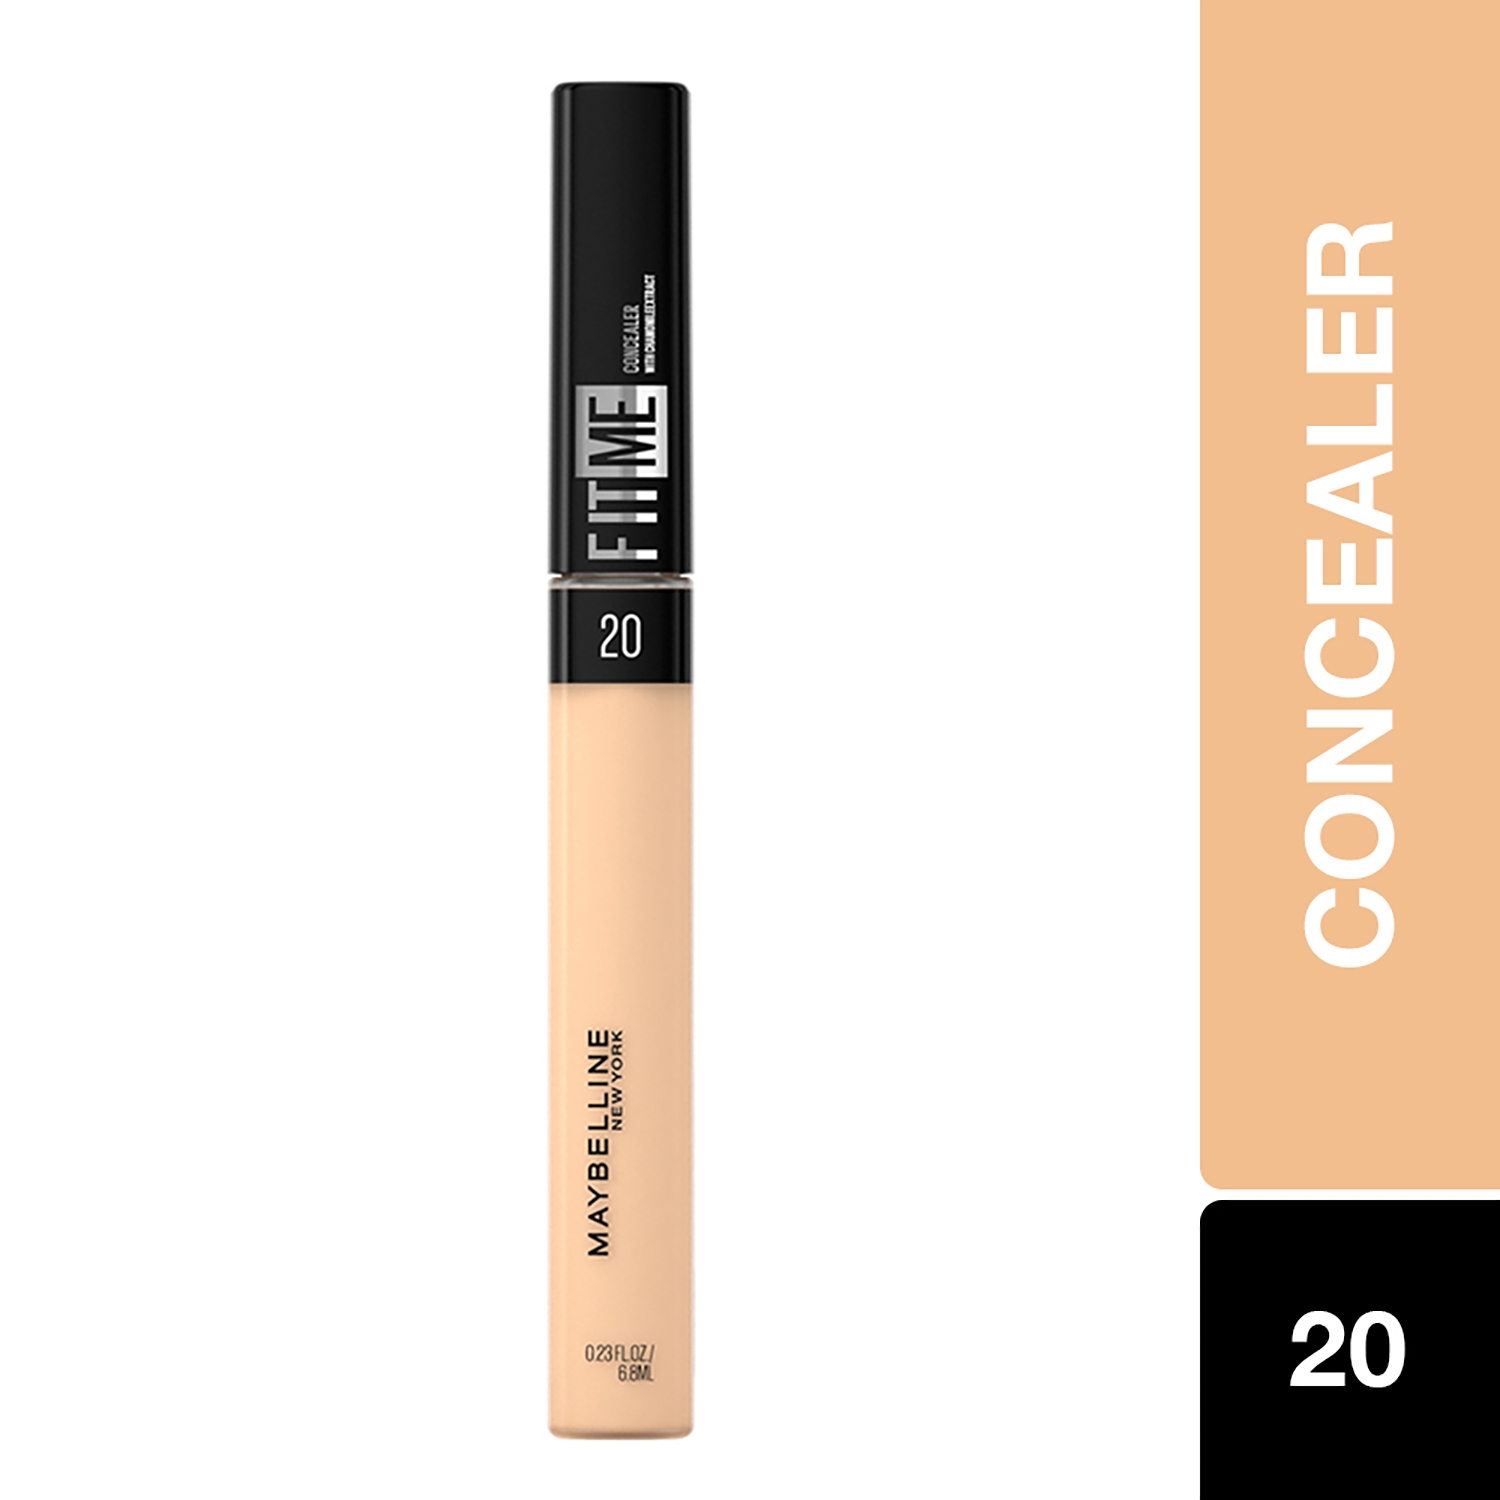 Maybelline New York | Maybelline New York Fit Me Concealer - 20 Sand (6.8ml)